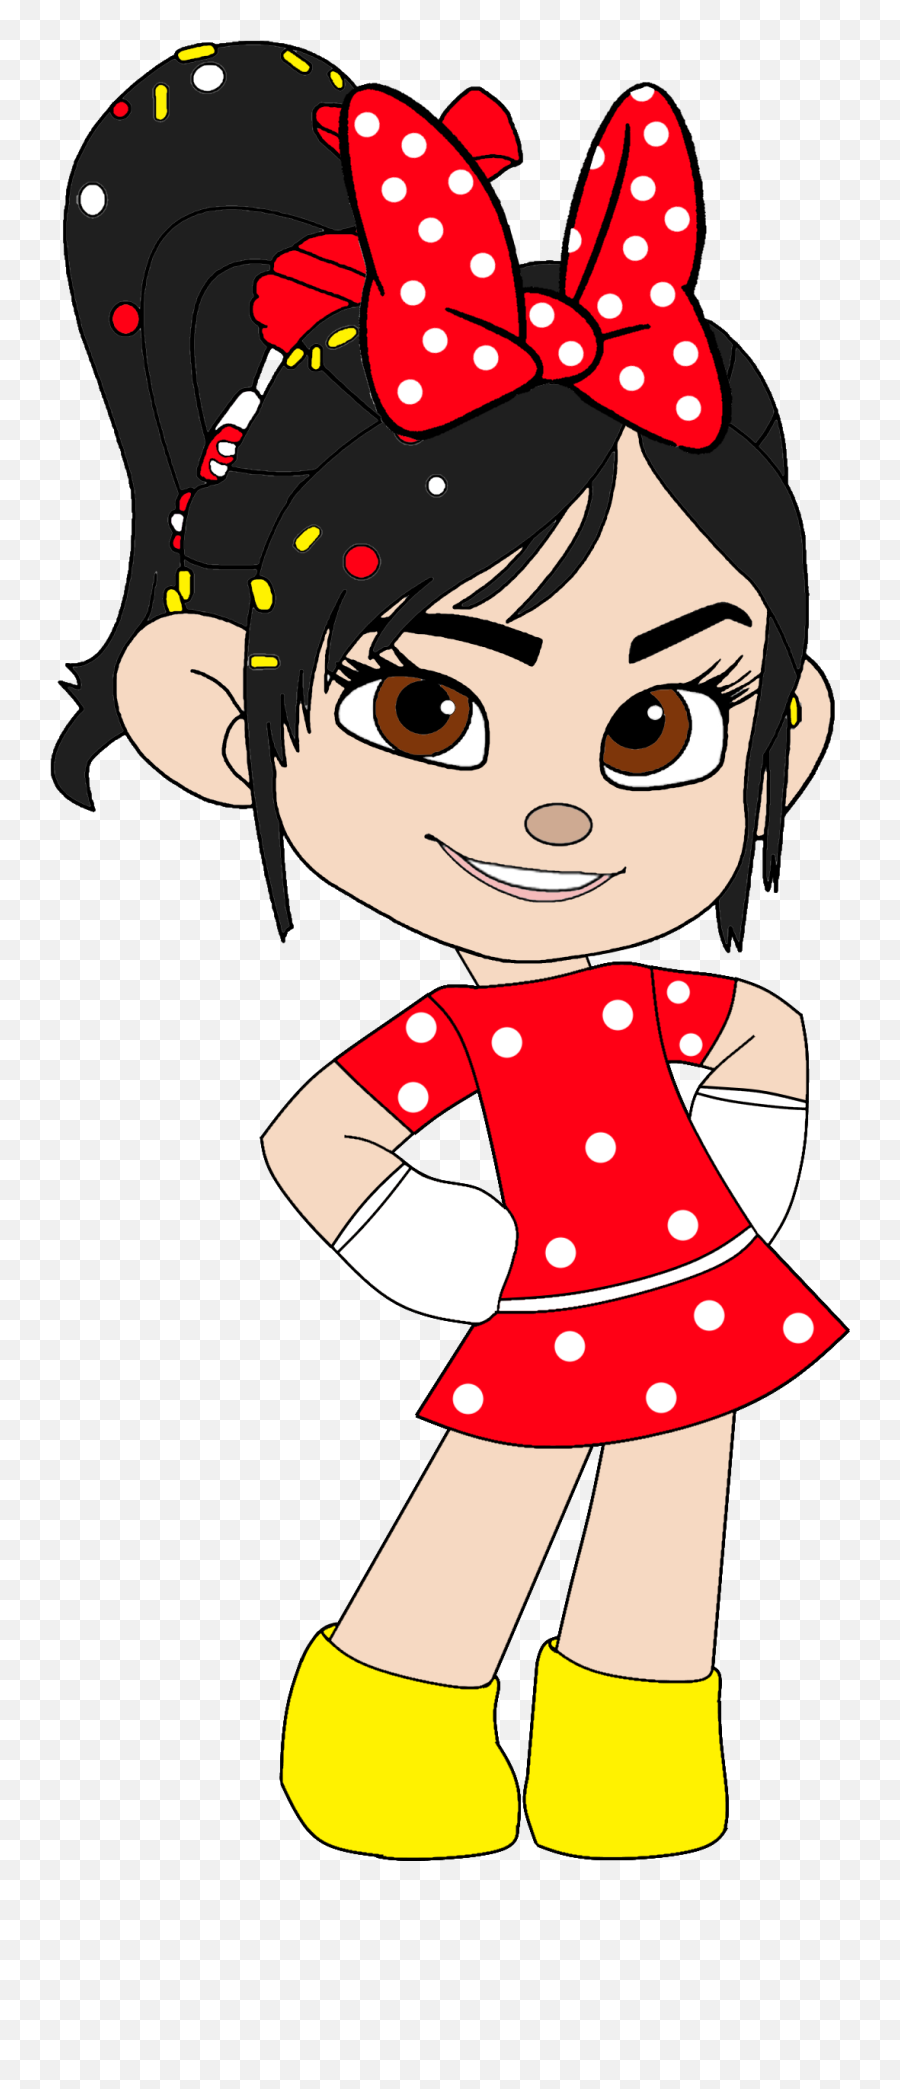 Minnie Mouse Bow Png Picture - Wreck It Ralph Vanellope Cartoon,Minnie Mouse Bow Png